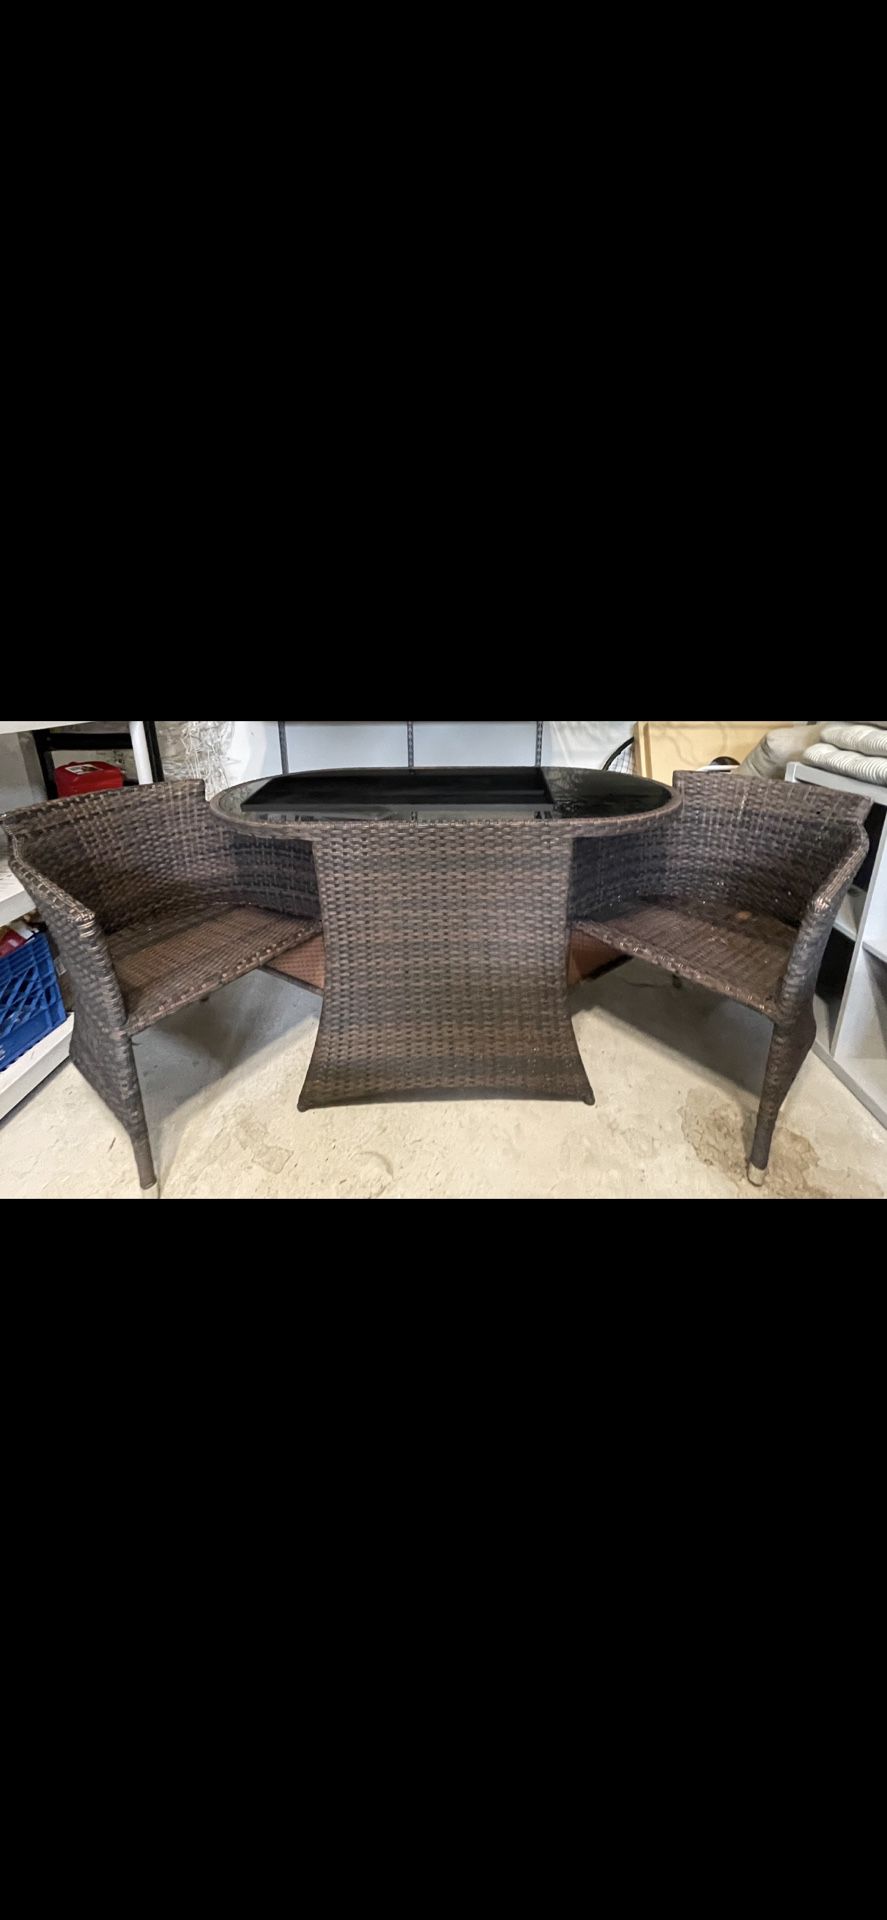 Wicker Patio Table and Chairs